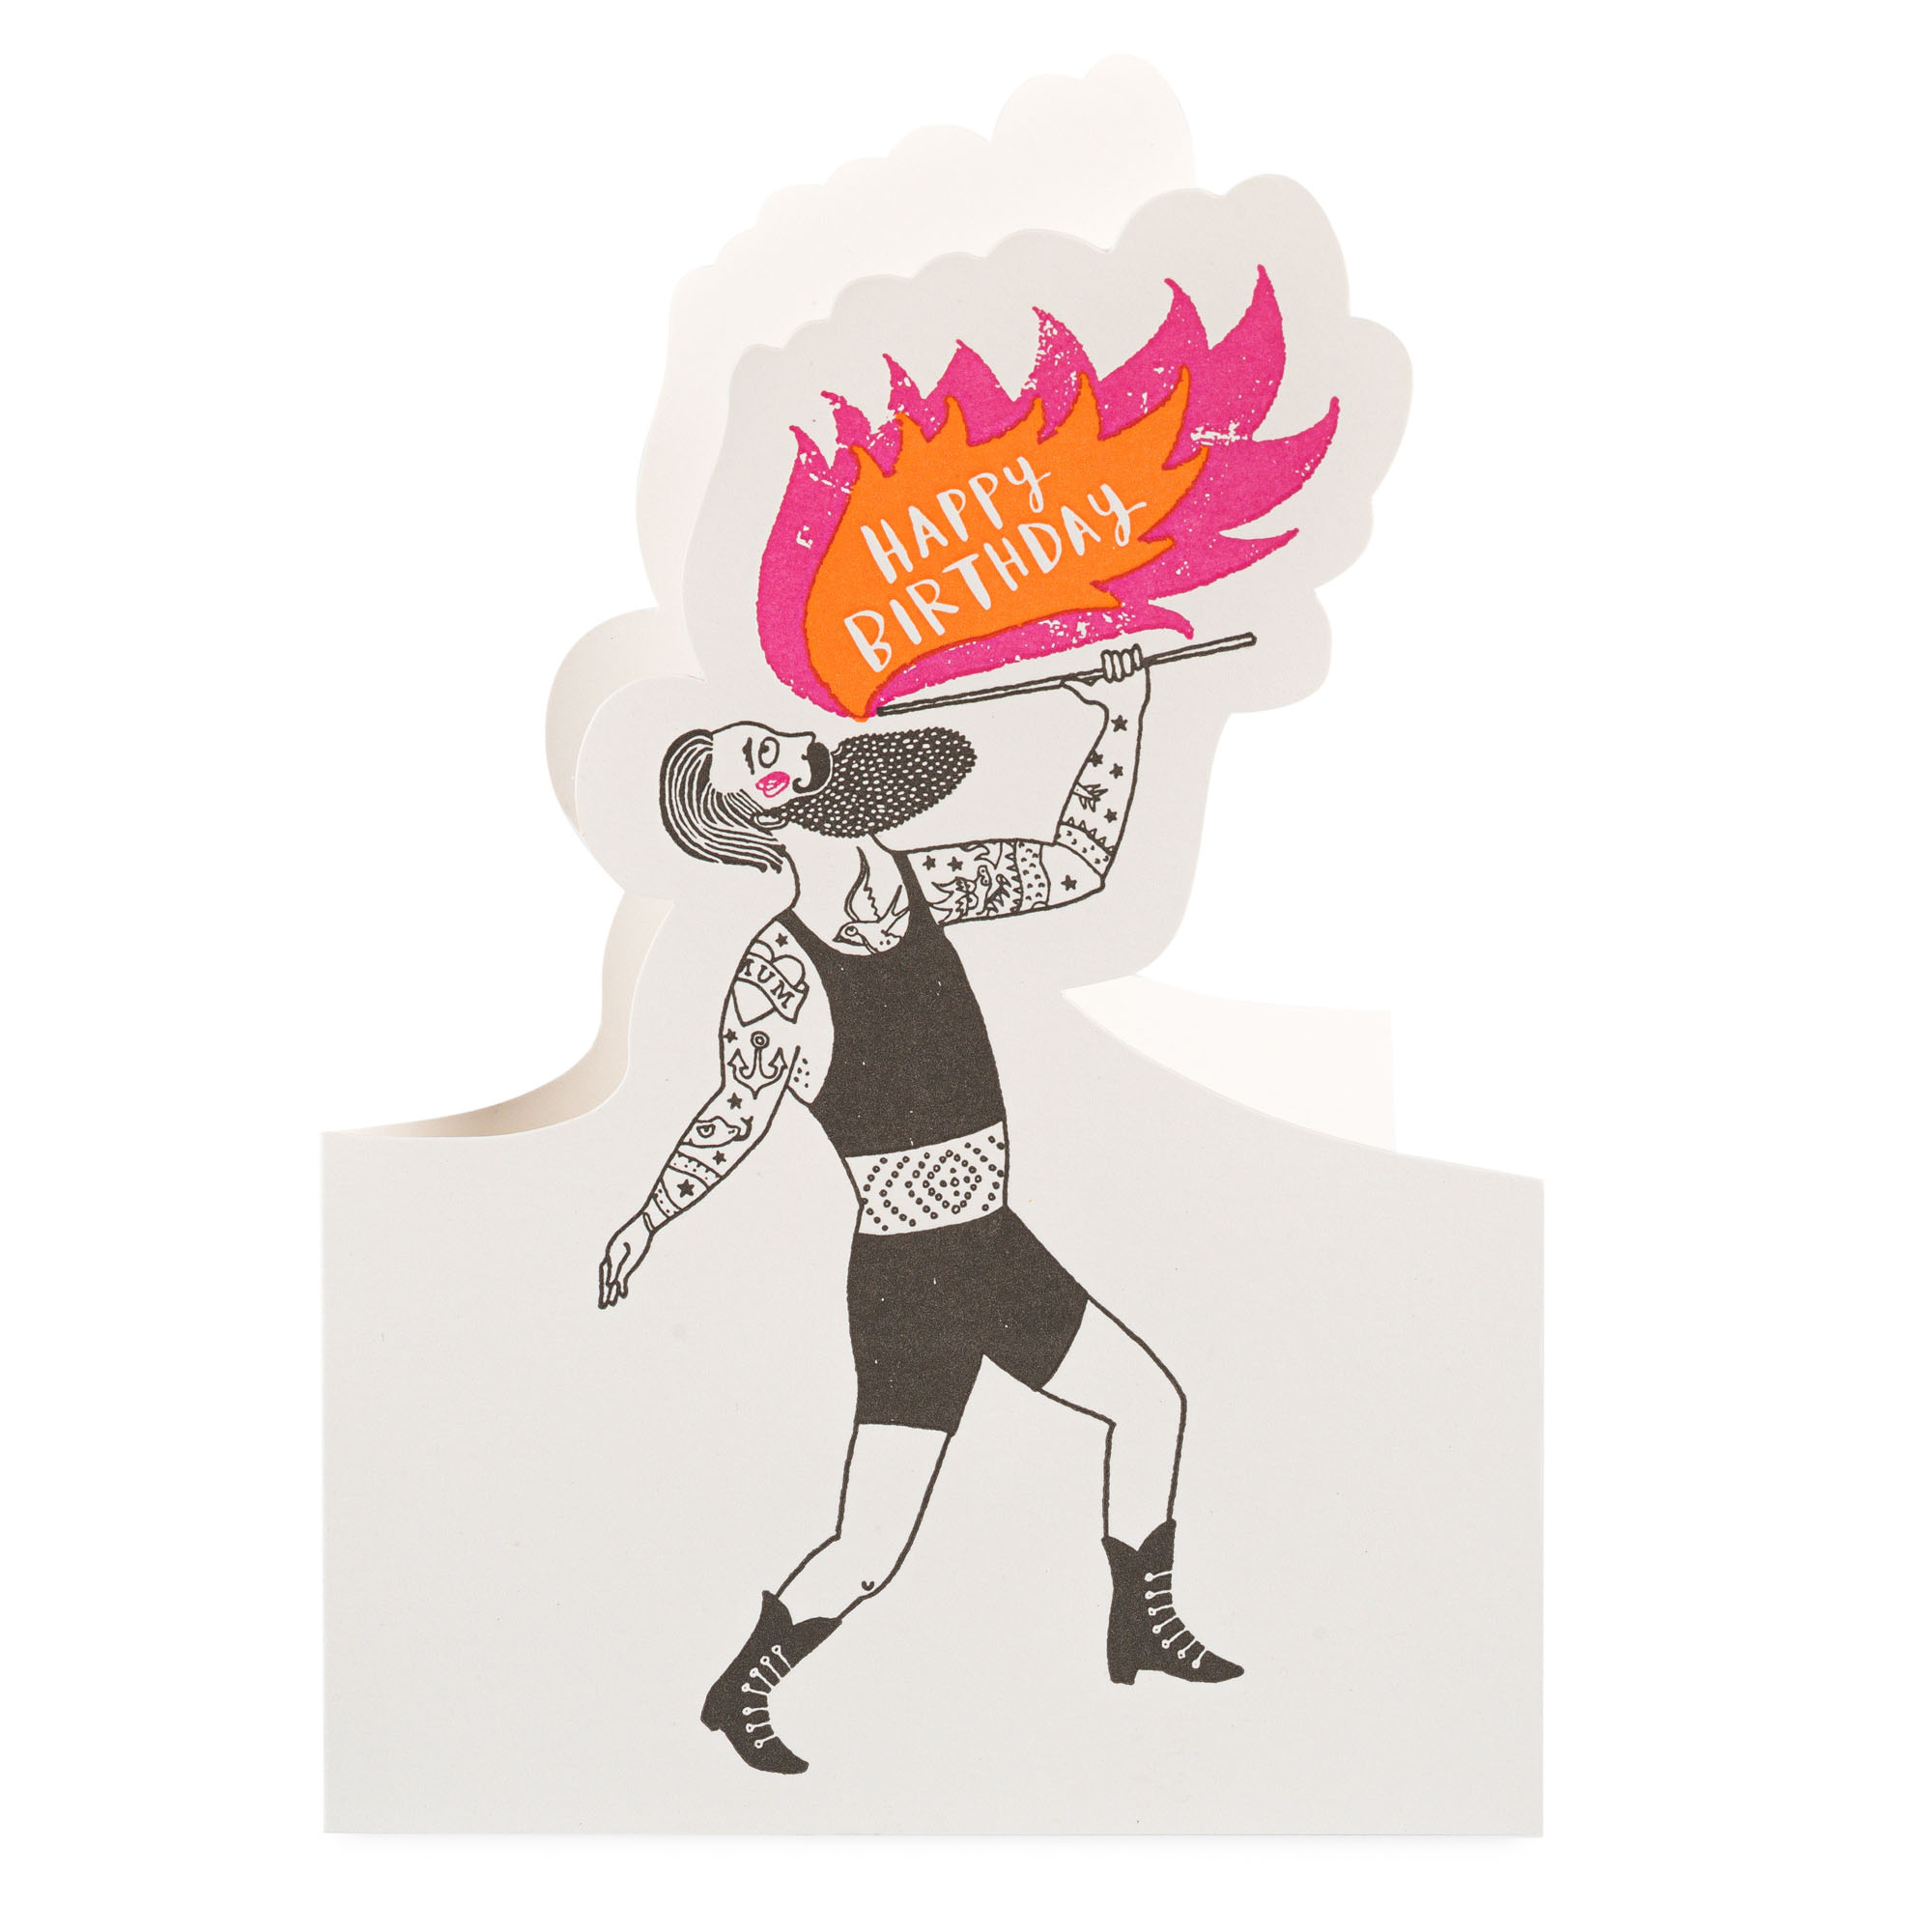 Happy Birthday Fire Breather - Cut-out Cards - Charlotte Farmer - from Archivist Gallery view